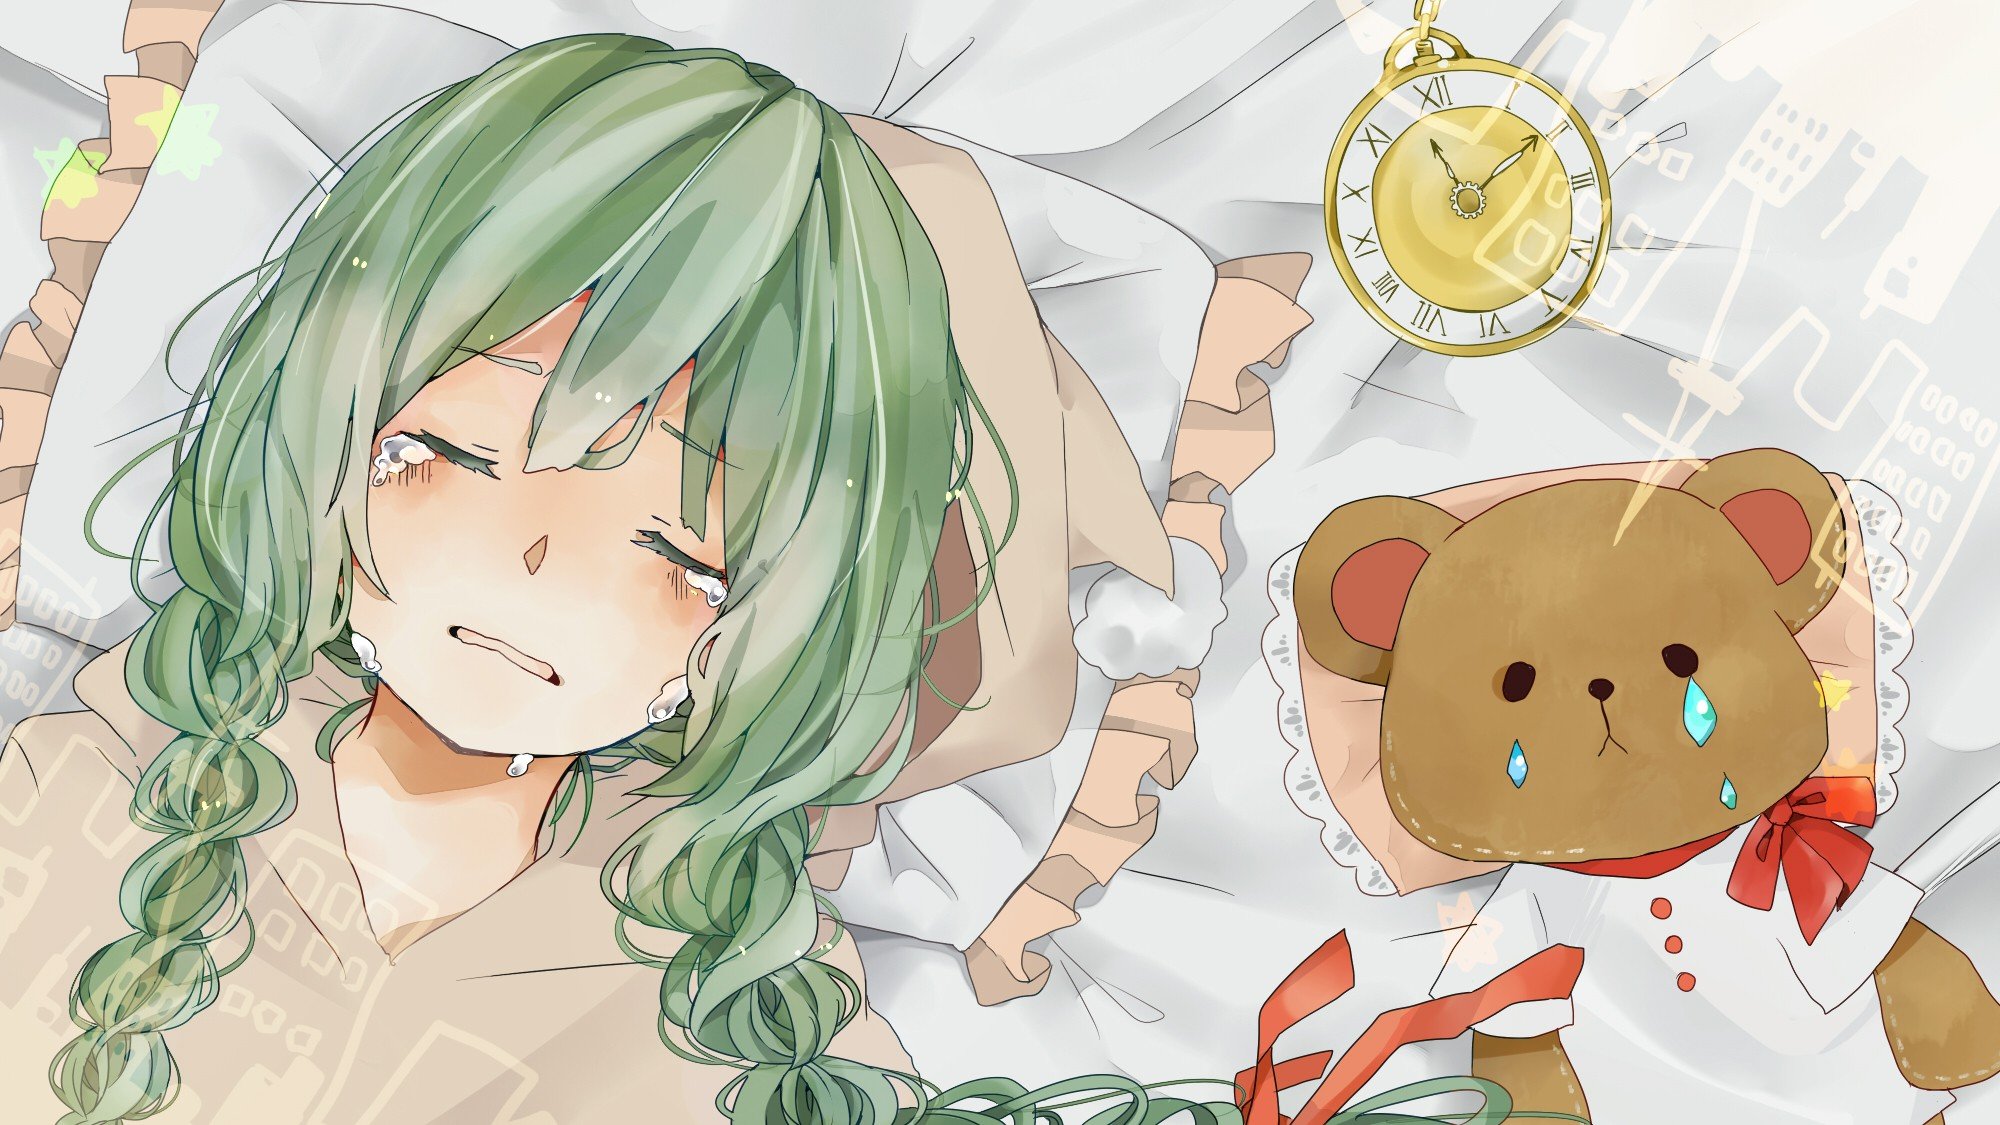 vocaloid, Hatsune, Miku, Tears, Long, Hair, Ribbons, Green, Hair, Pillows, Stuffed, Animals, Lying, Down, Open, Mouth, Pocket, Watch, Crying, Closed, Eyes, Teddy, Bears, Anime, Girls, Faces, Hair, Ornaments, Bed Wallpaper